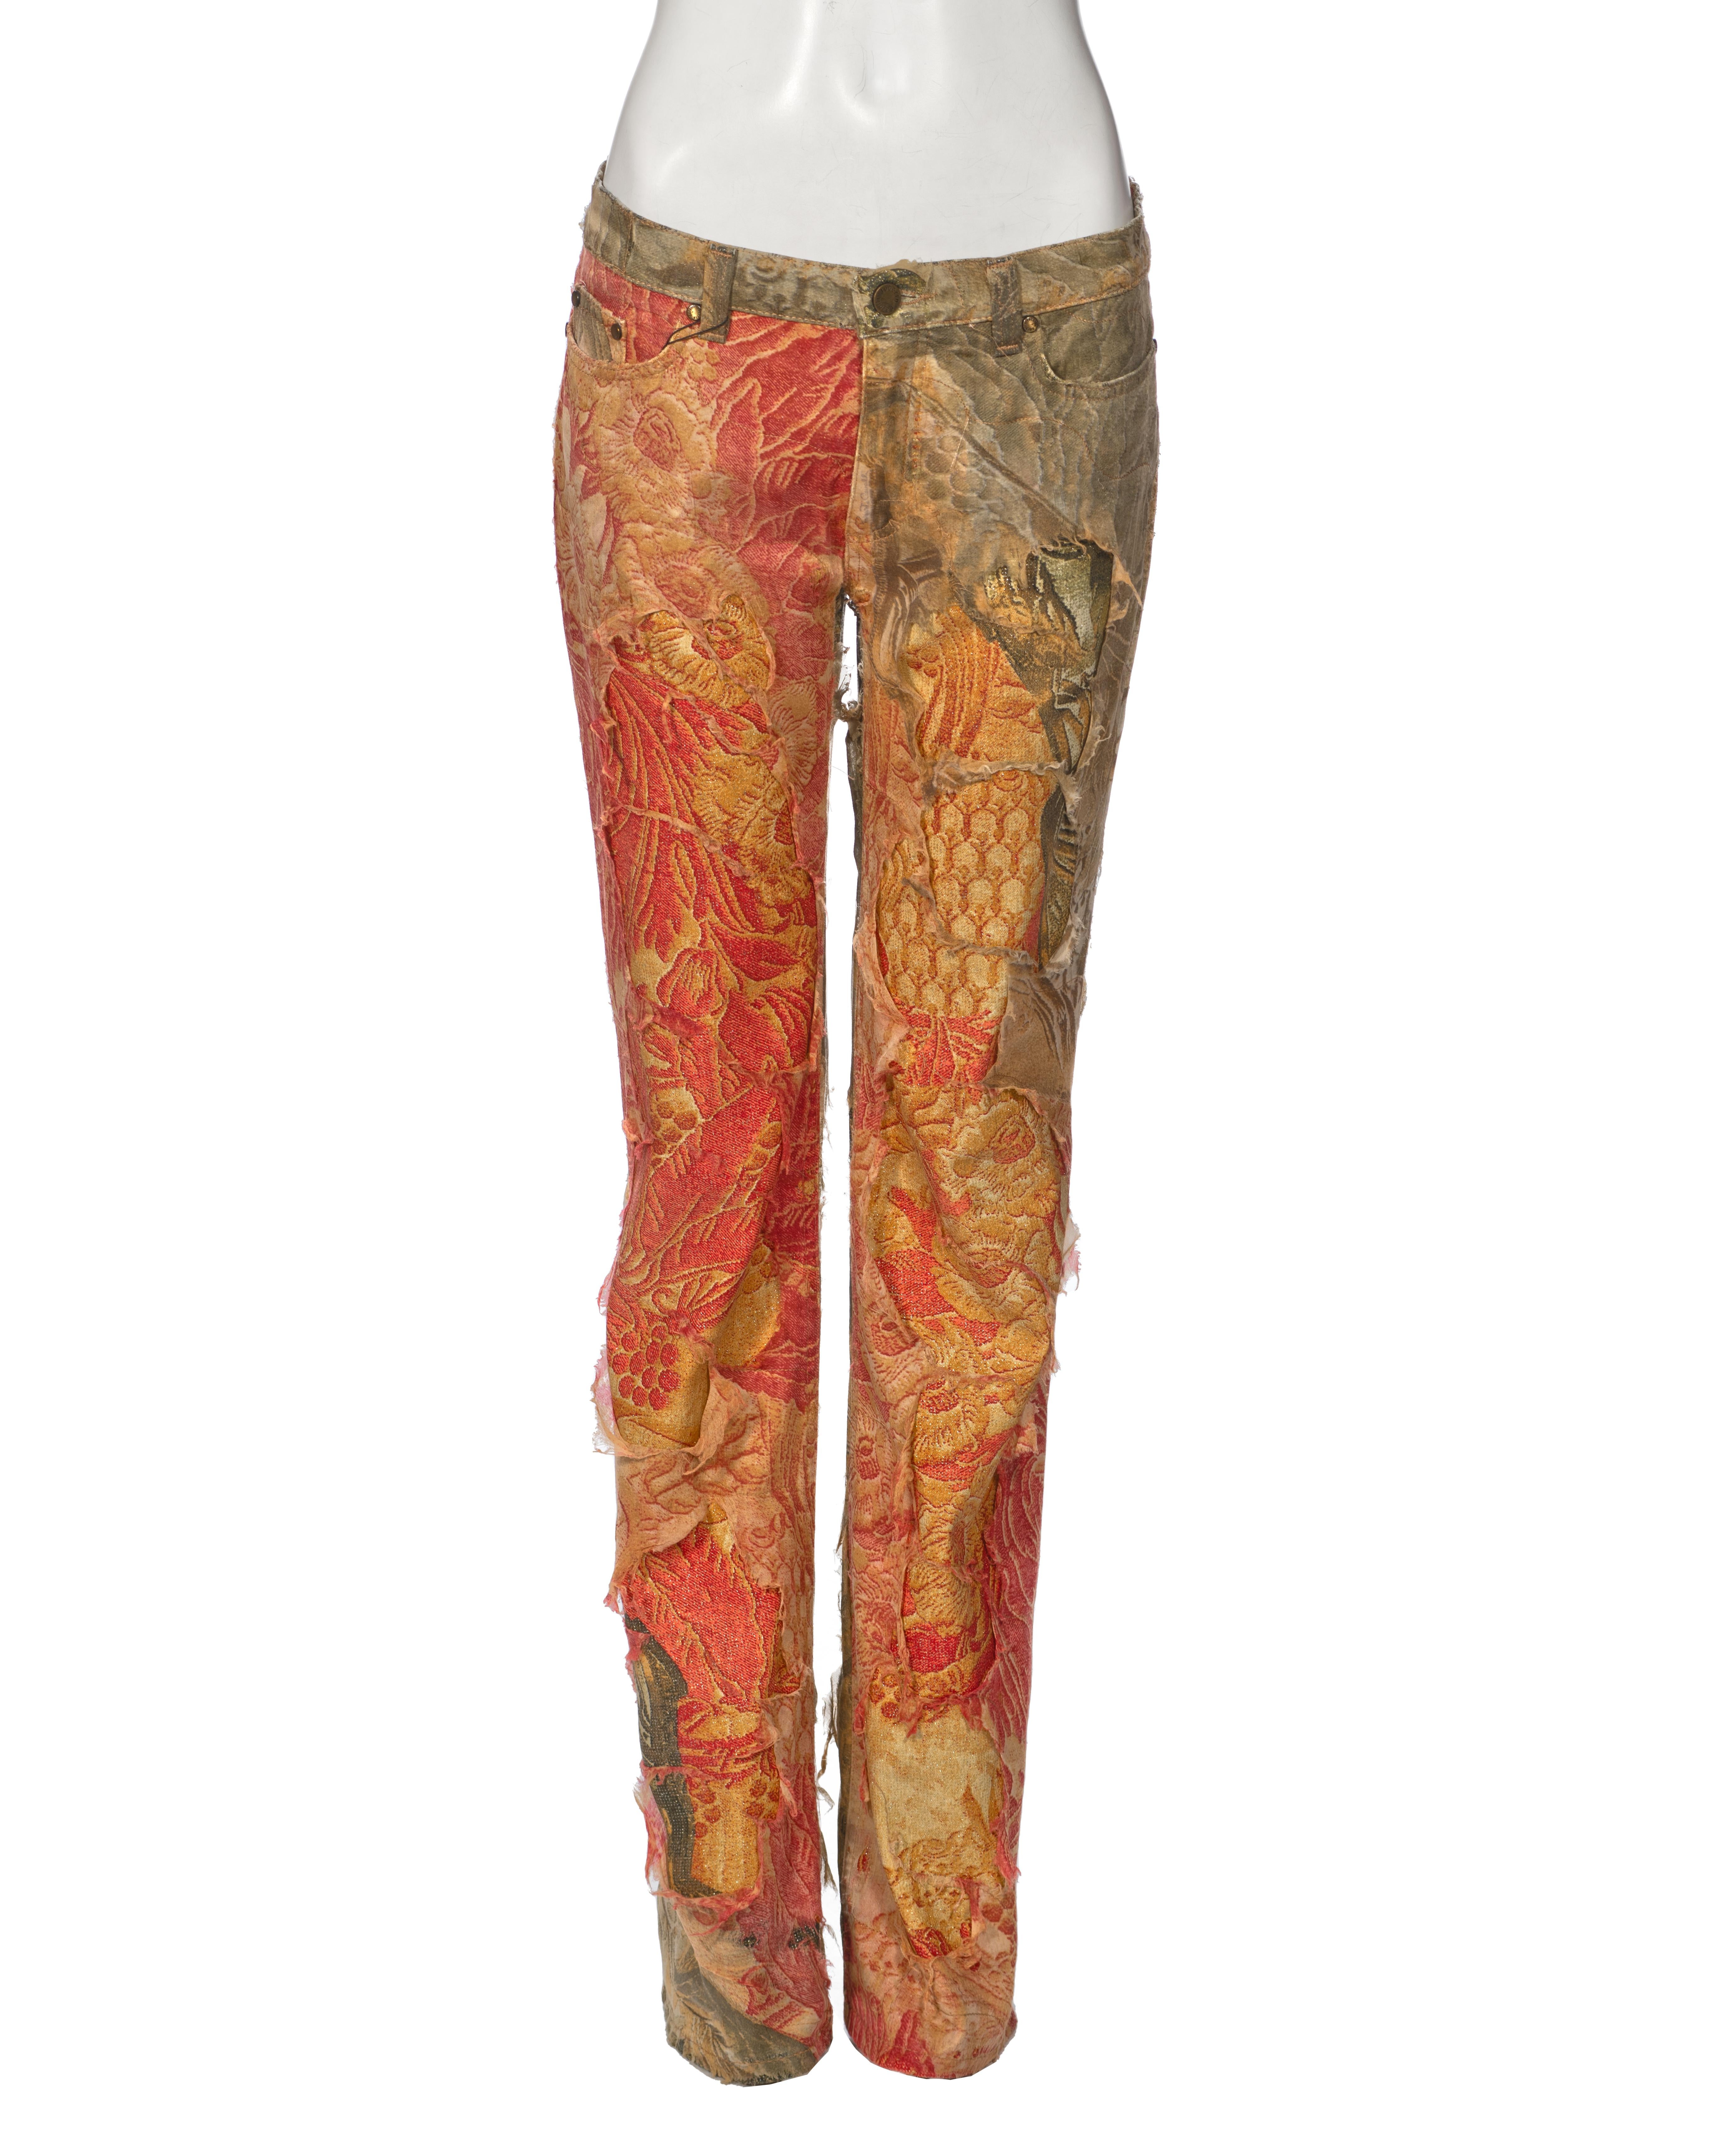 ▪ Roberto Cavalli Runway Pants
▪ Fall-Winter 2001
▪ Sold by One of a Kind Archive
▪ Cotton pants with distressed silk overlay
▪ Baroque and nature-inspired design
▪ Button and zip fly closure
▪ Straight leg
▪ Material: Cotton, Silk
▪ Colour: